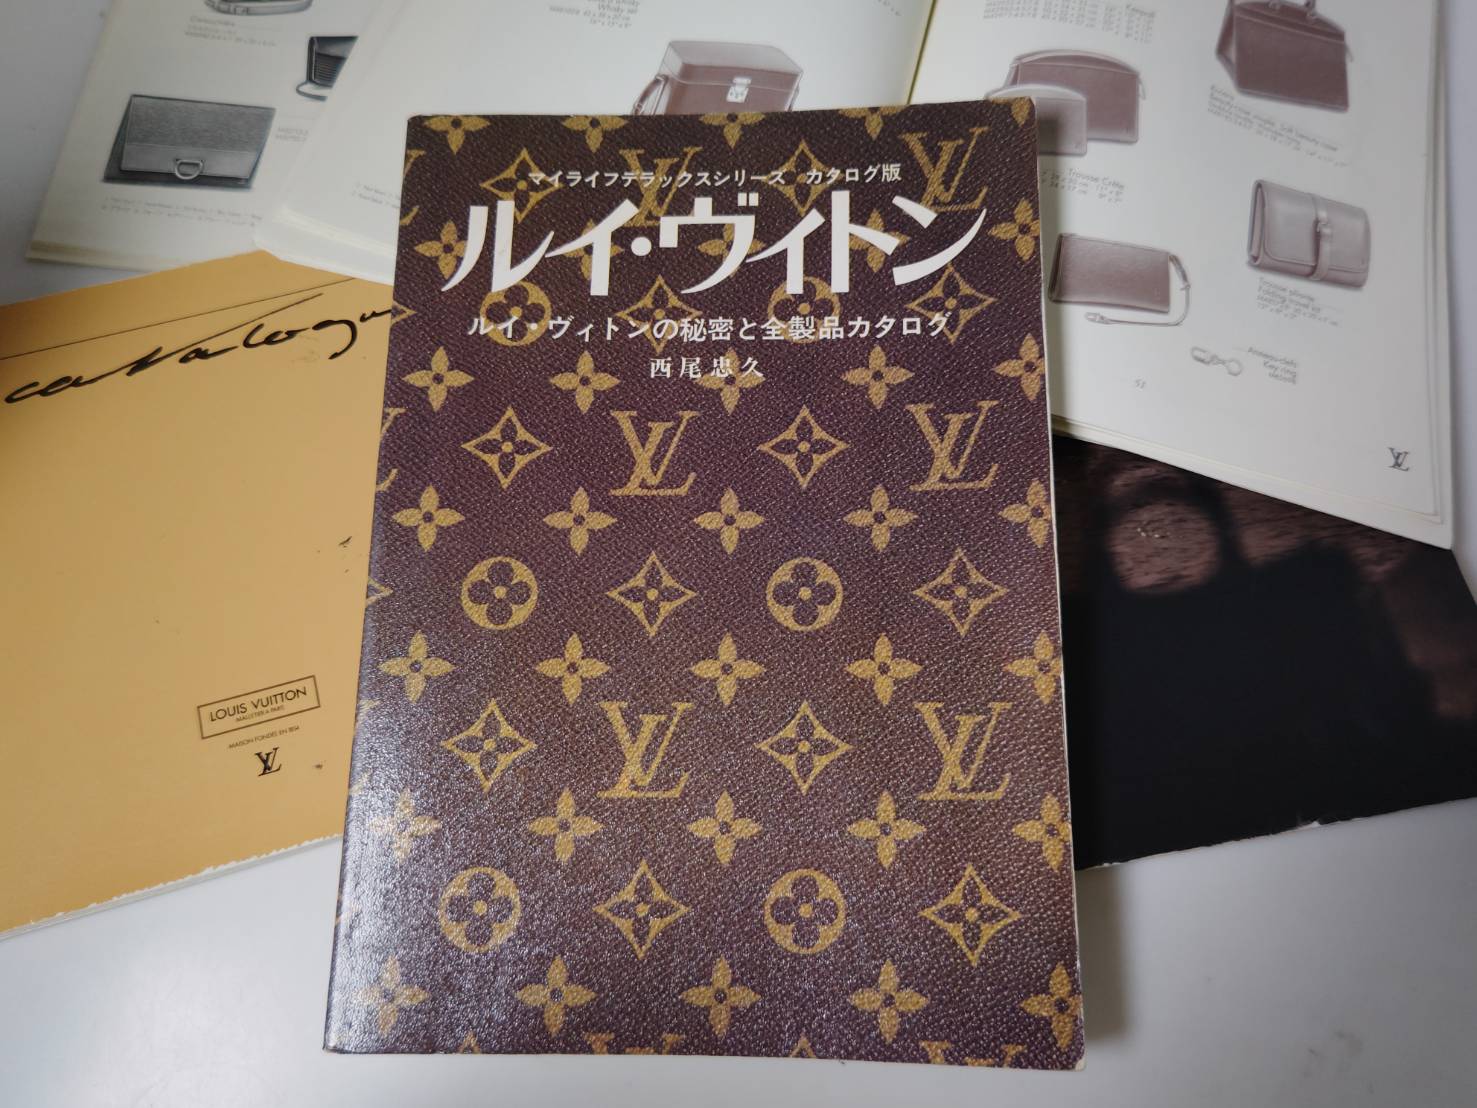 "Louis Vuitton Secrets and All Product Catalog"